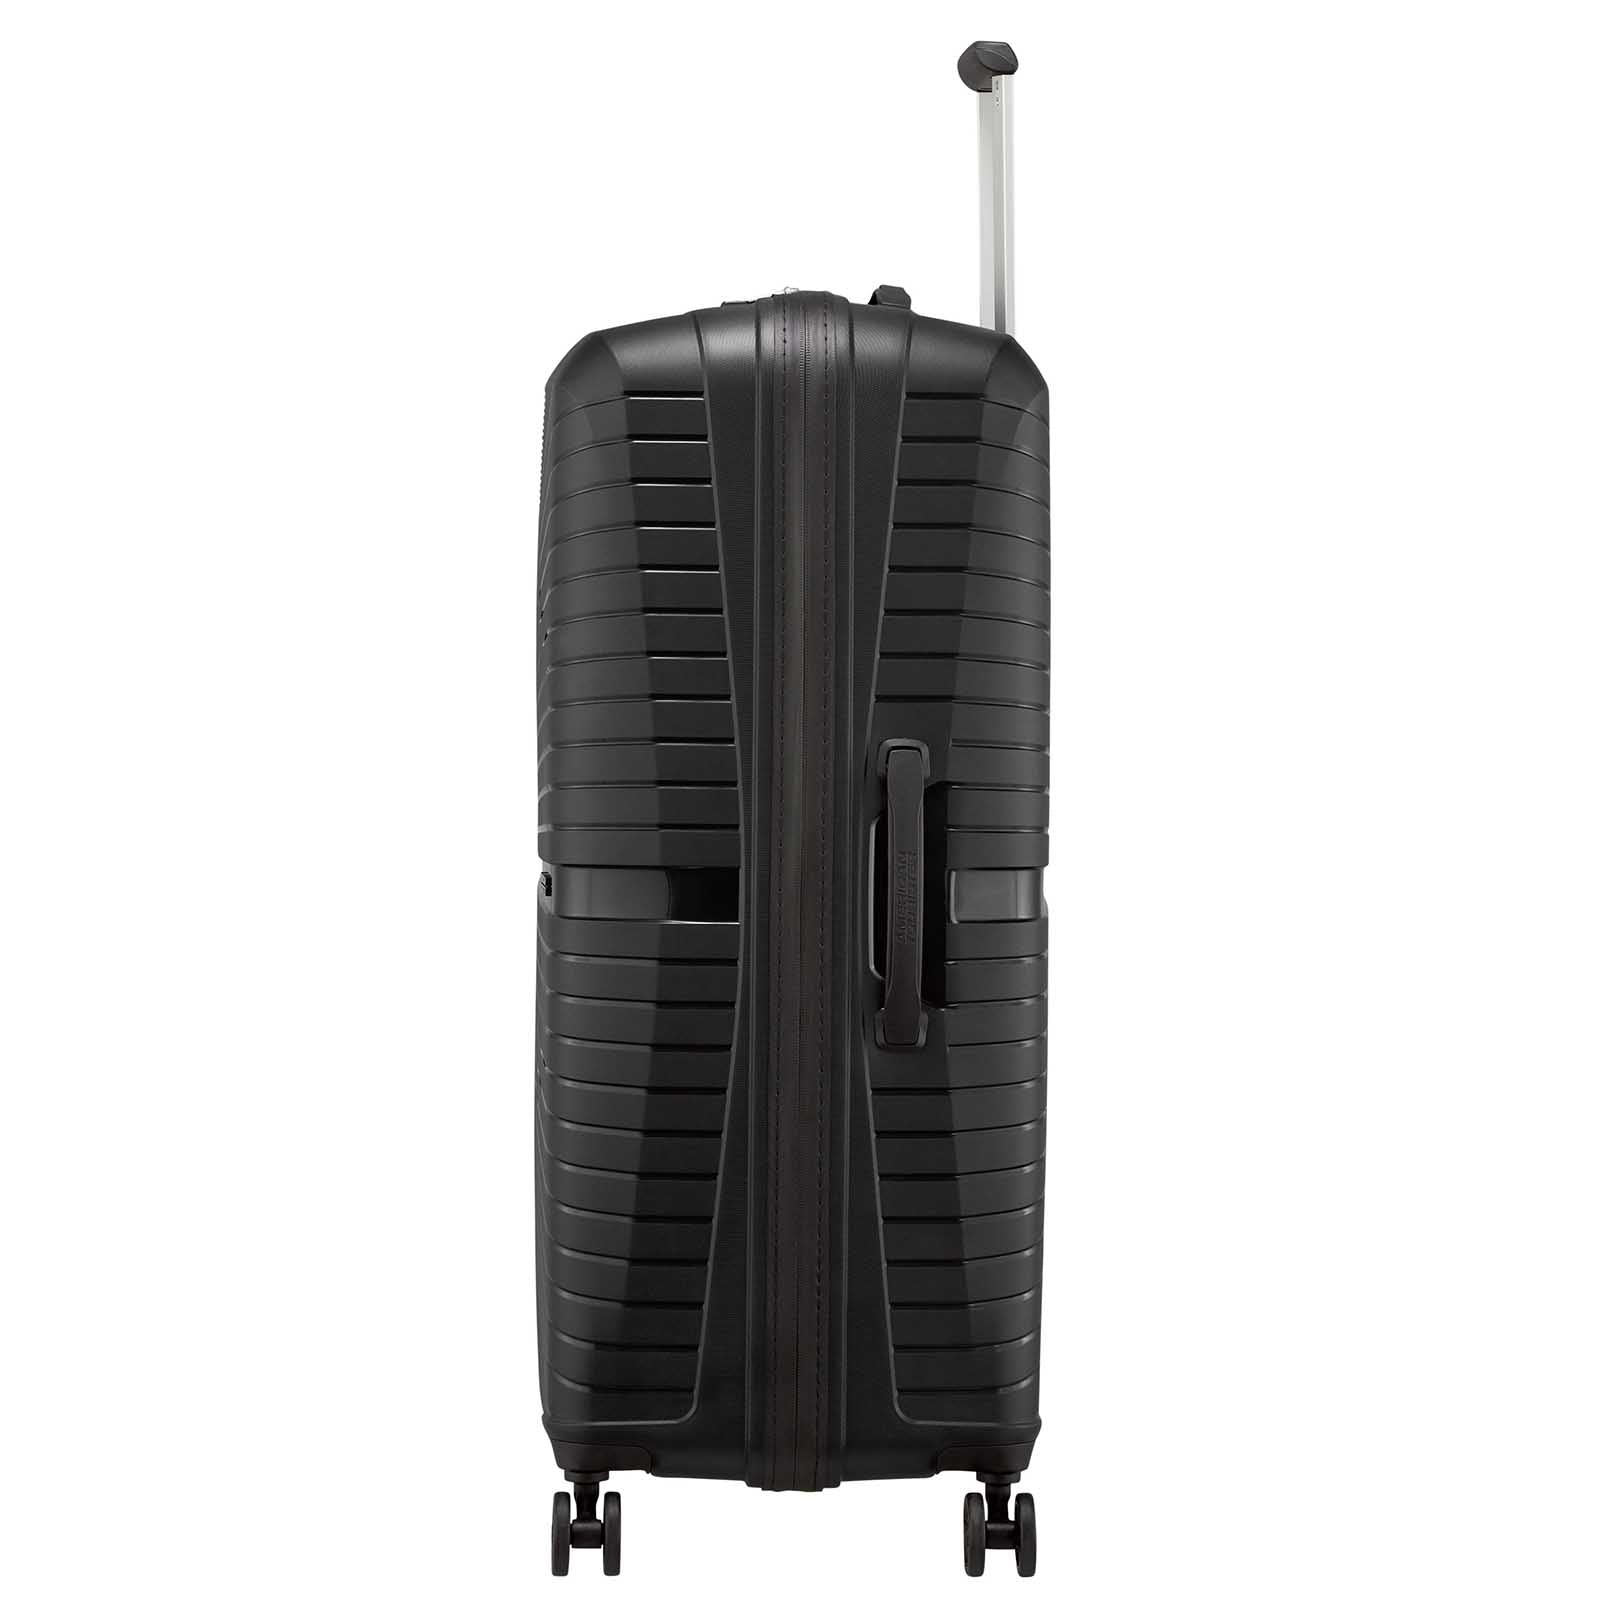 American-Tourister-Airconic-77cm-Suitcase-Onyx-Black-Side-Handle